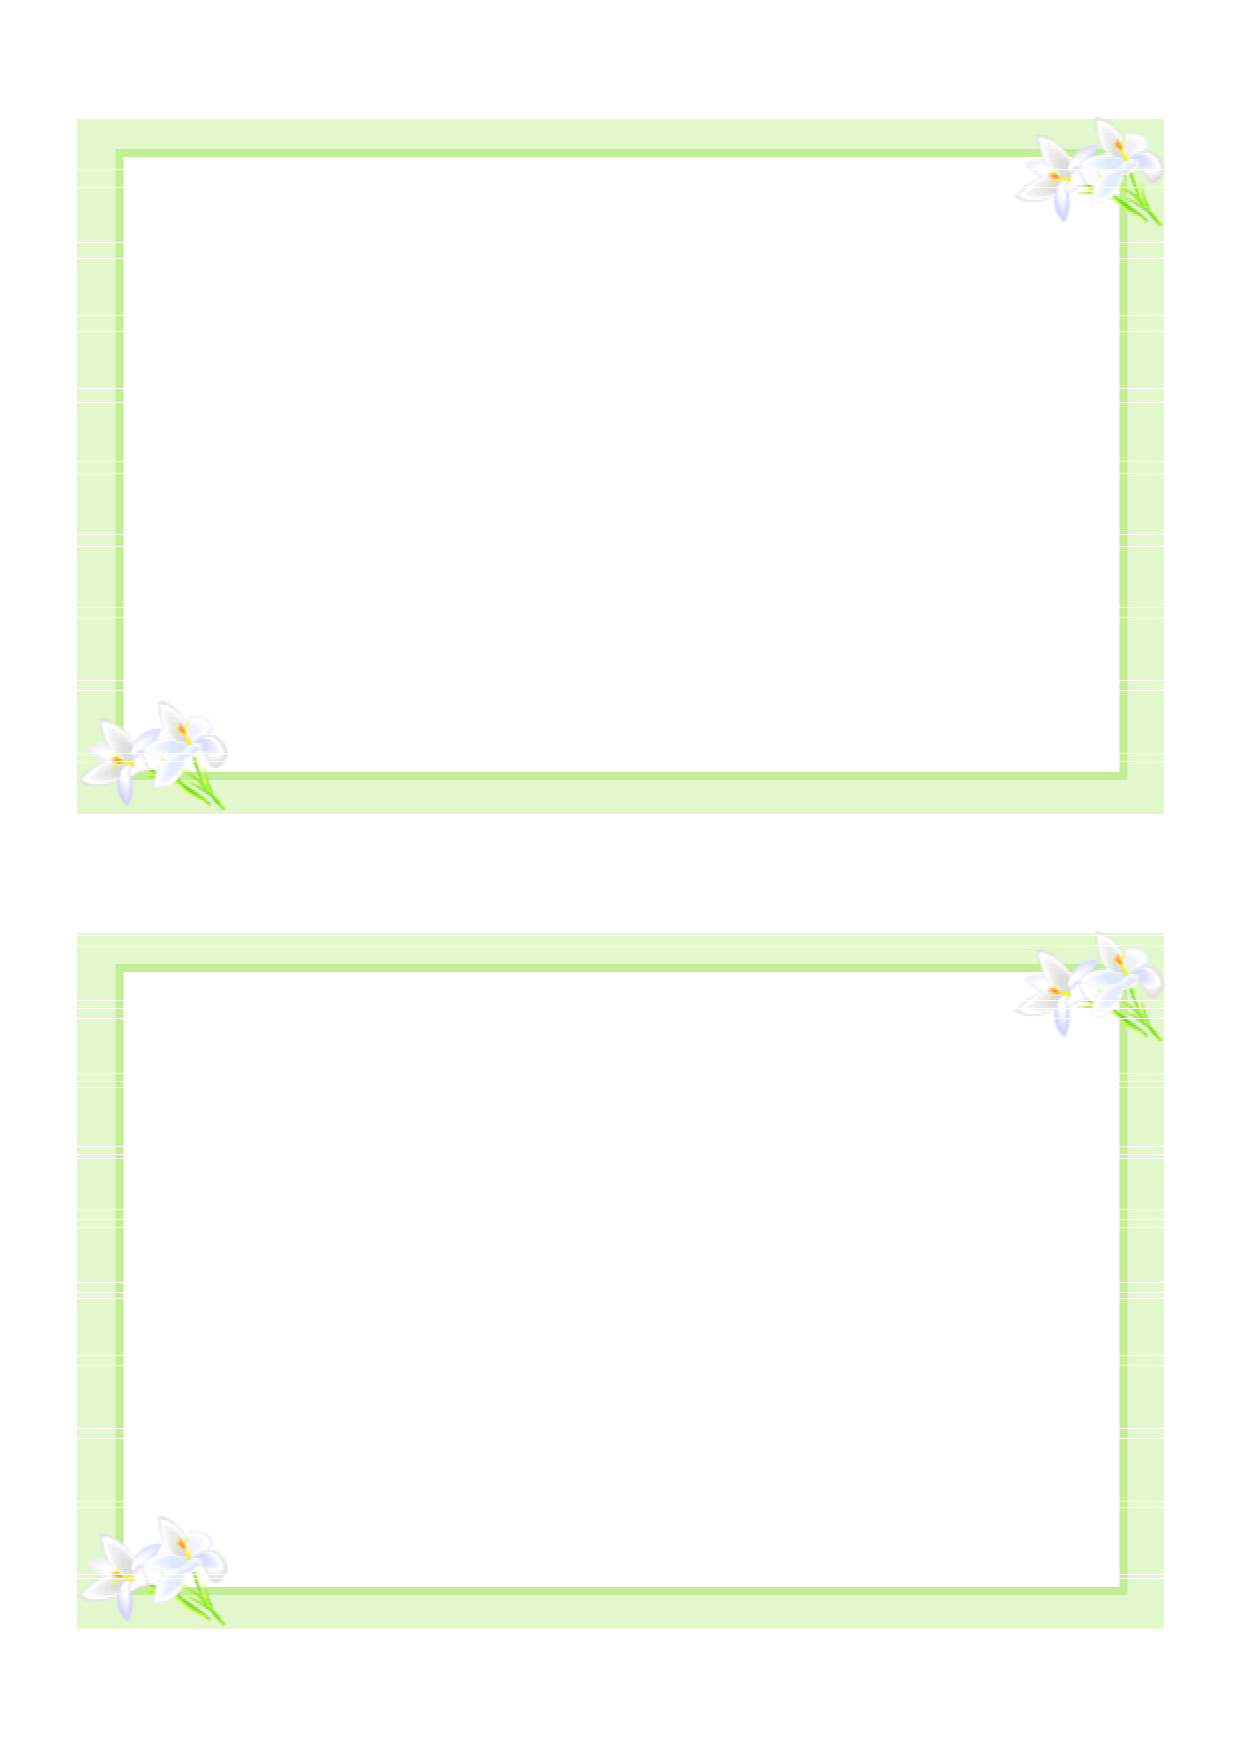 Blank Id Card Template Eliolera Com. 100 Free Blank Card With Free Printable Blank Greeting Card Templates